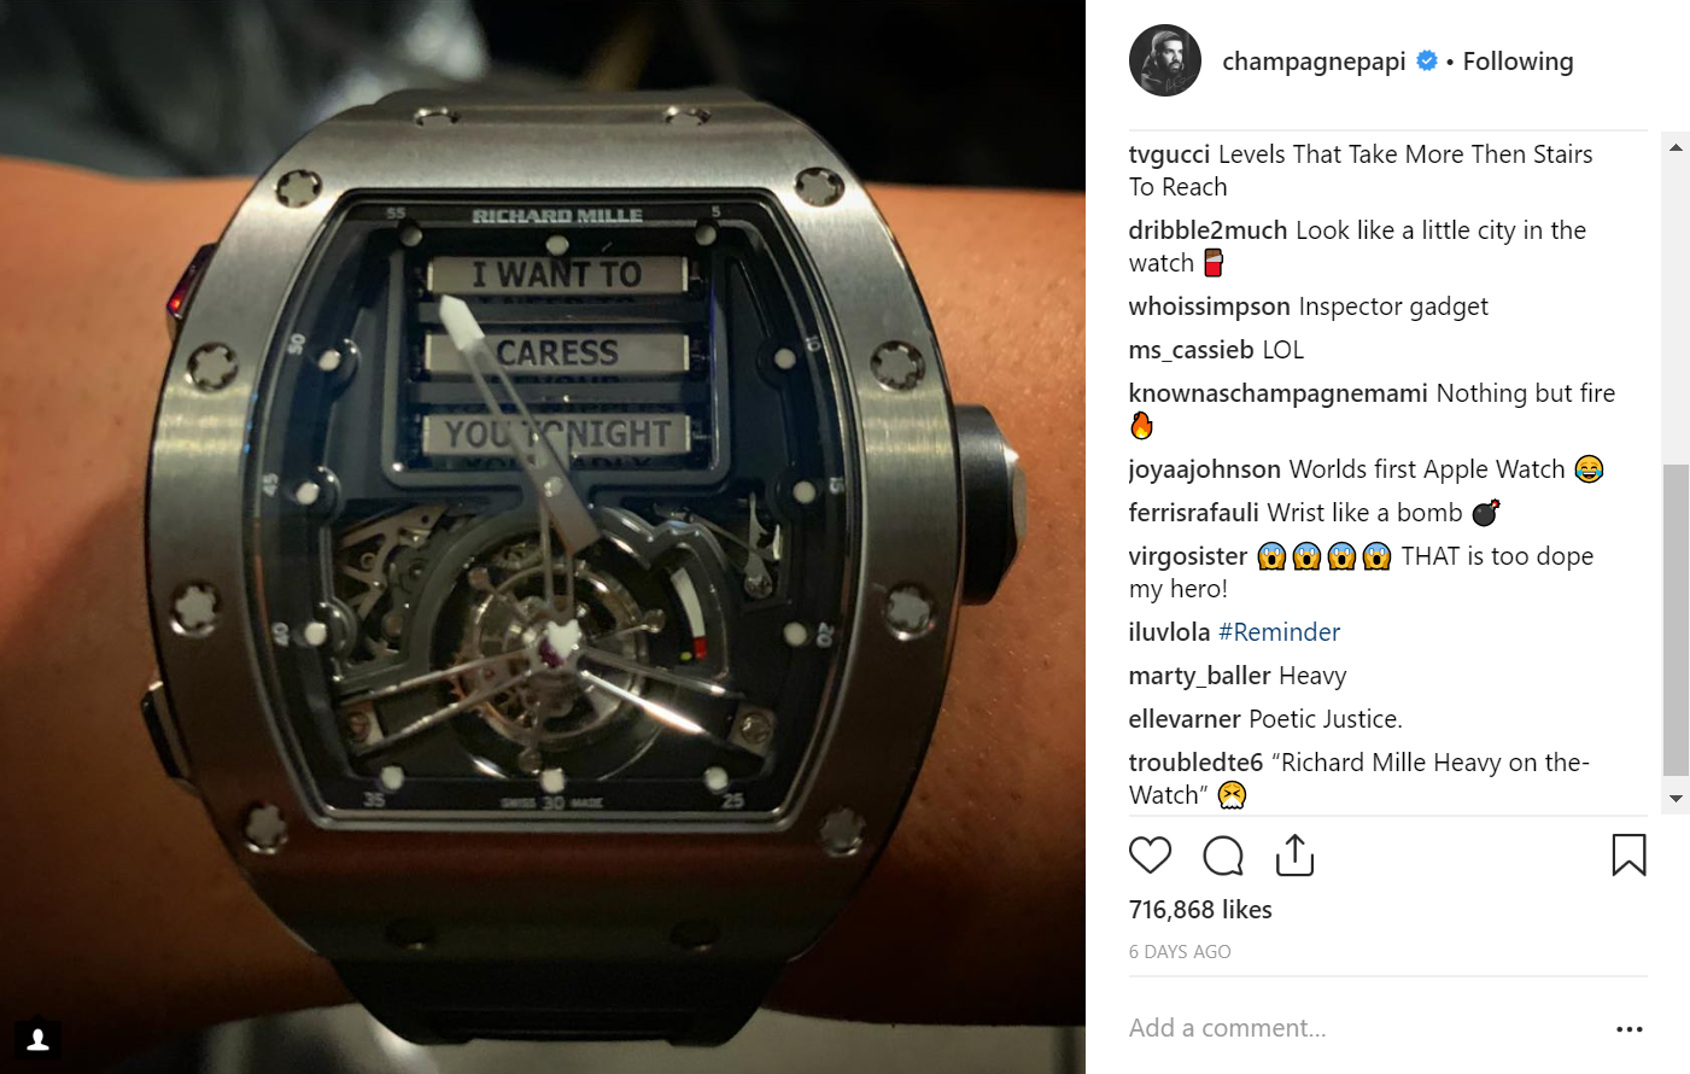 drake and jay-z's watches